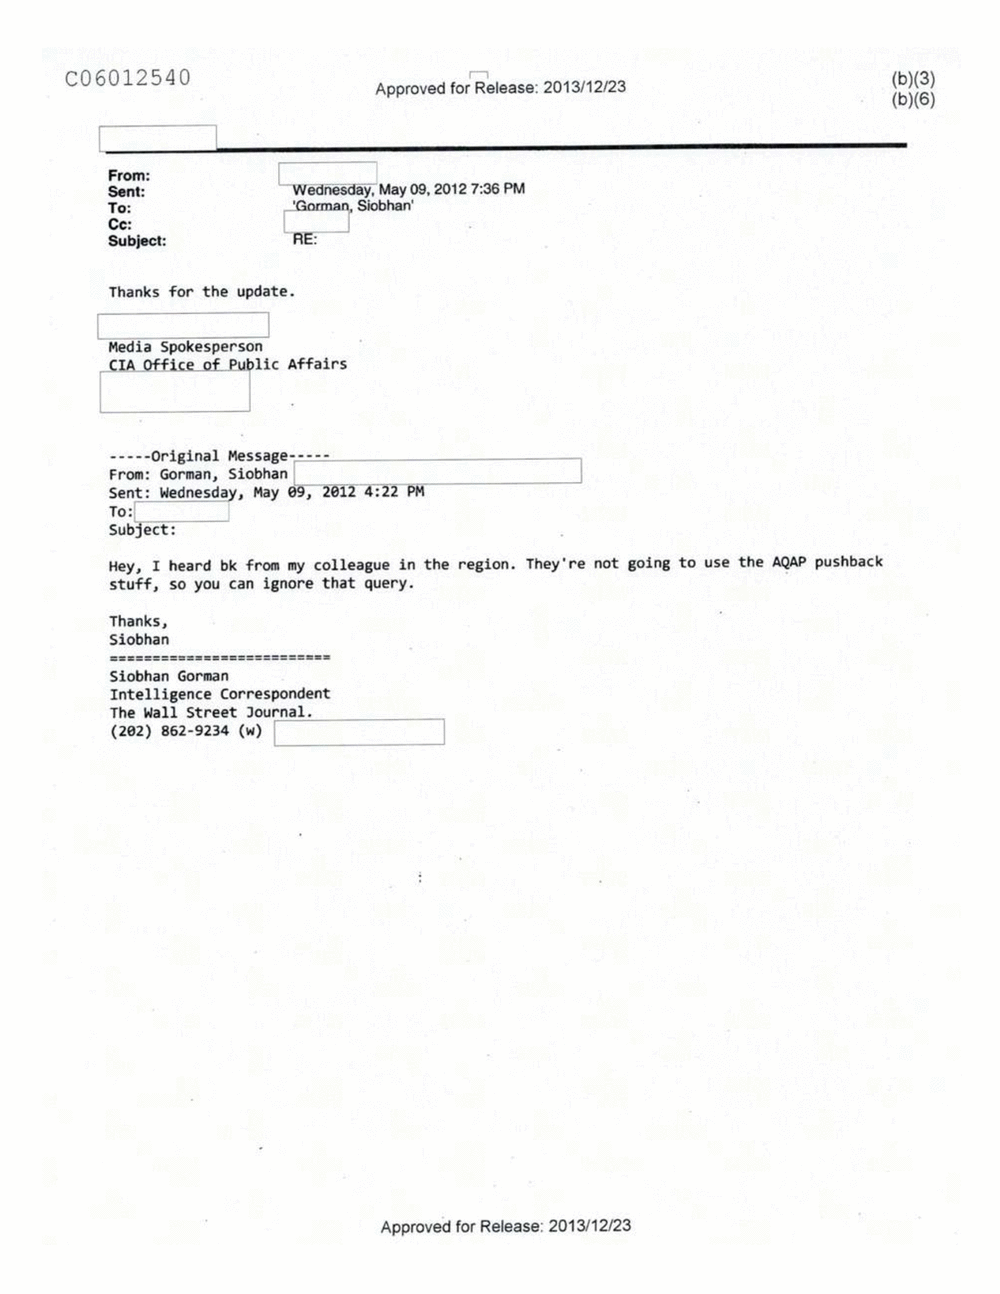 Page 72 from Email Correspondence Between Reporters and CIA Flacks